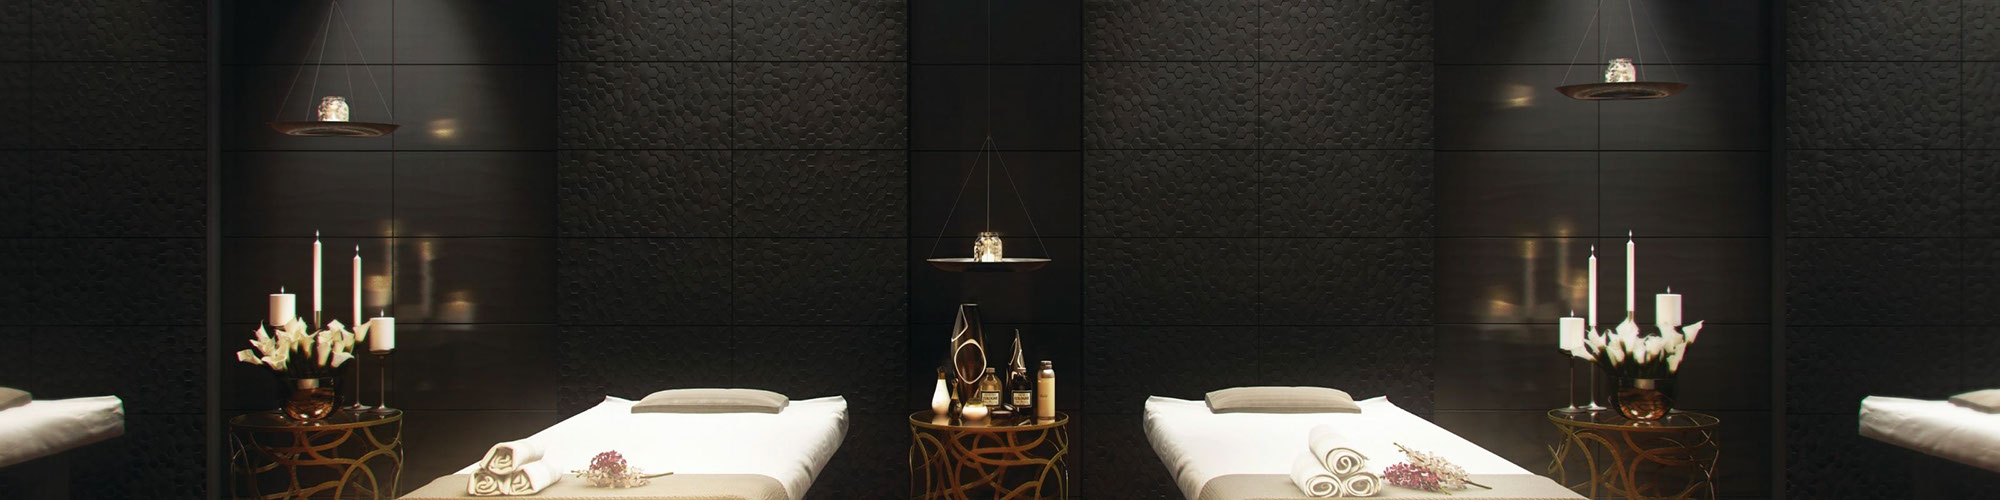 Spa massage room with black textured wall tile, massage tables with blankets & pillows, side tables with candles, flowers, and essential oils.